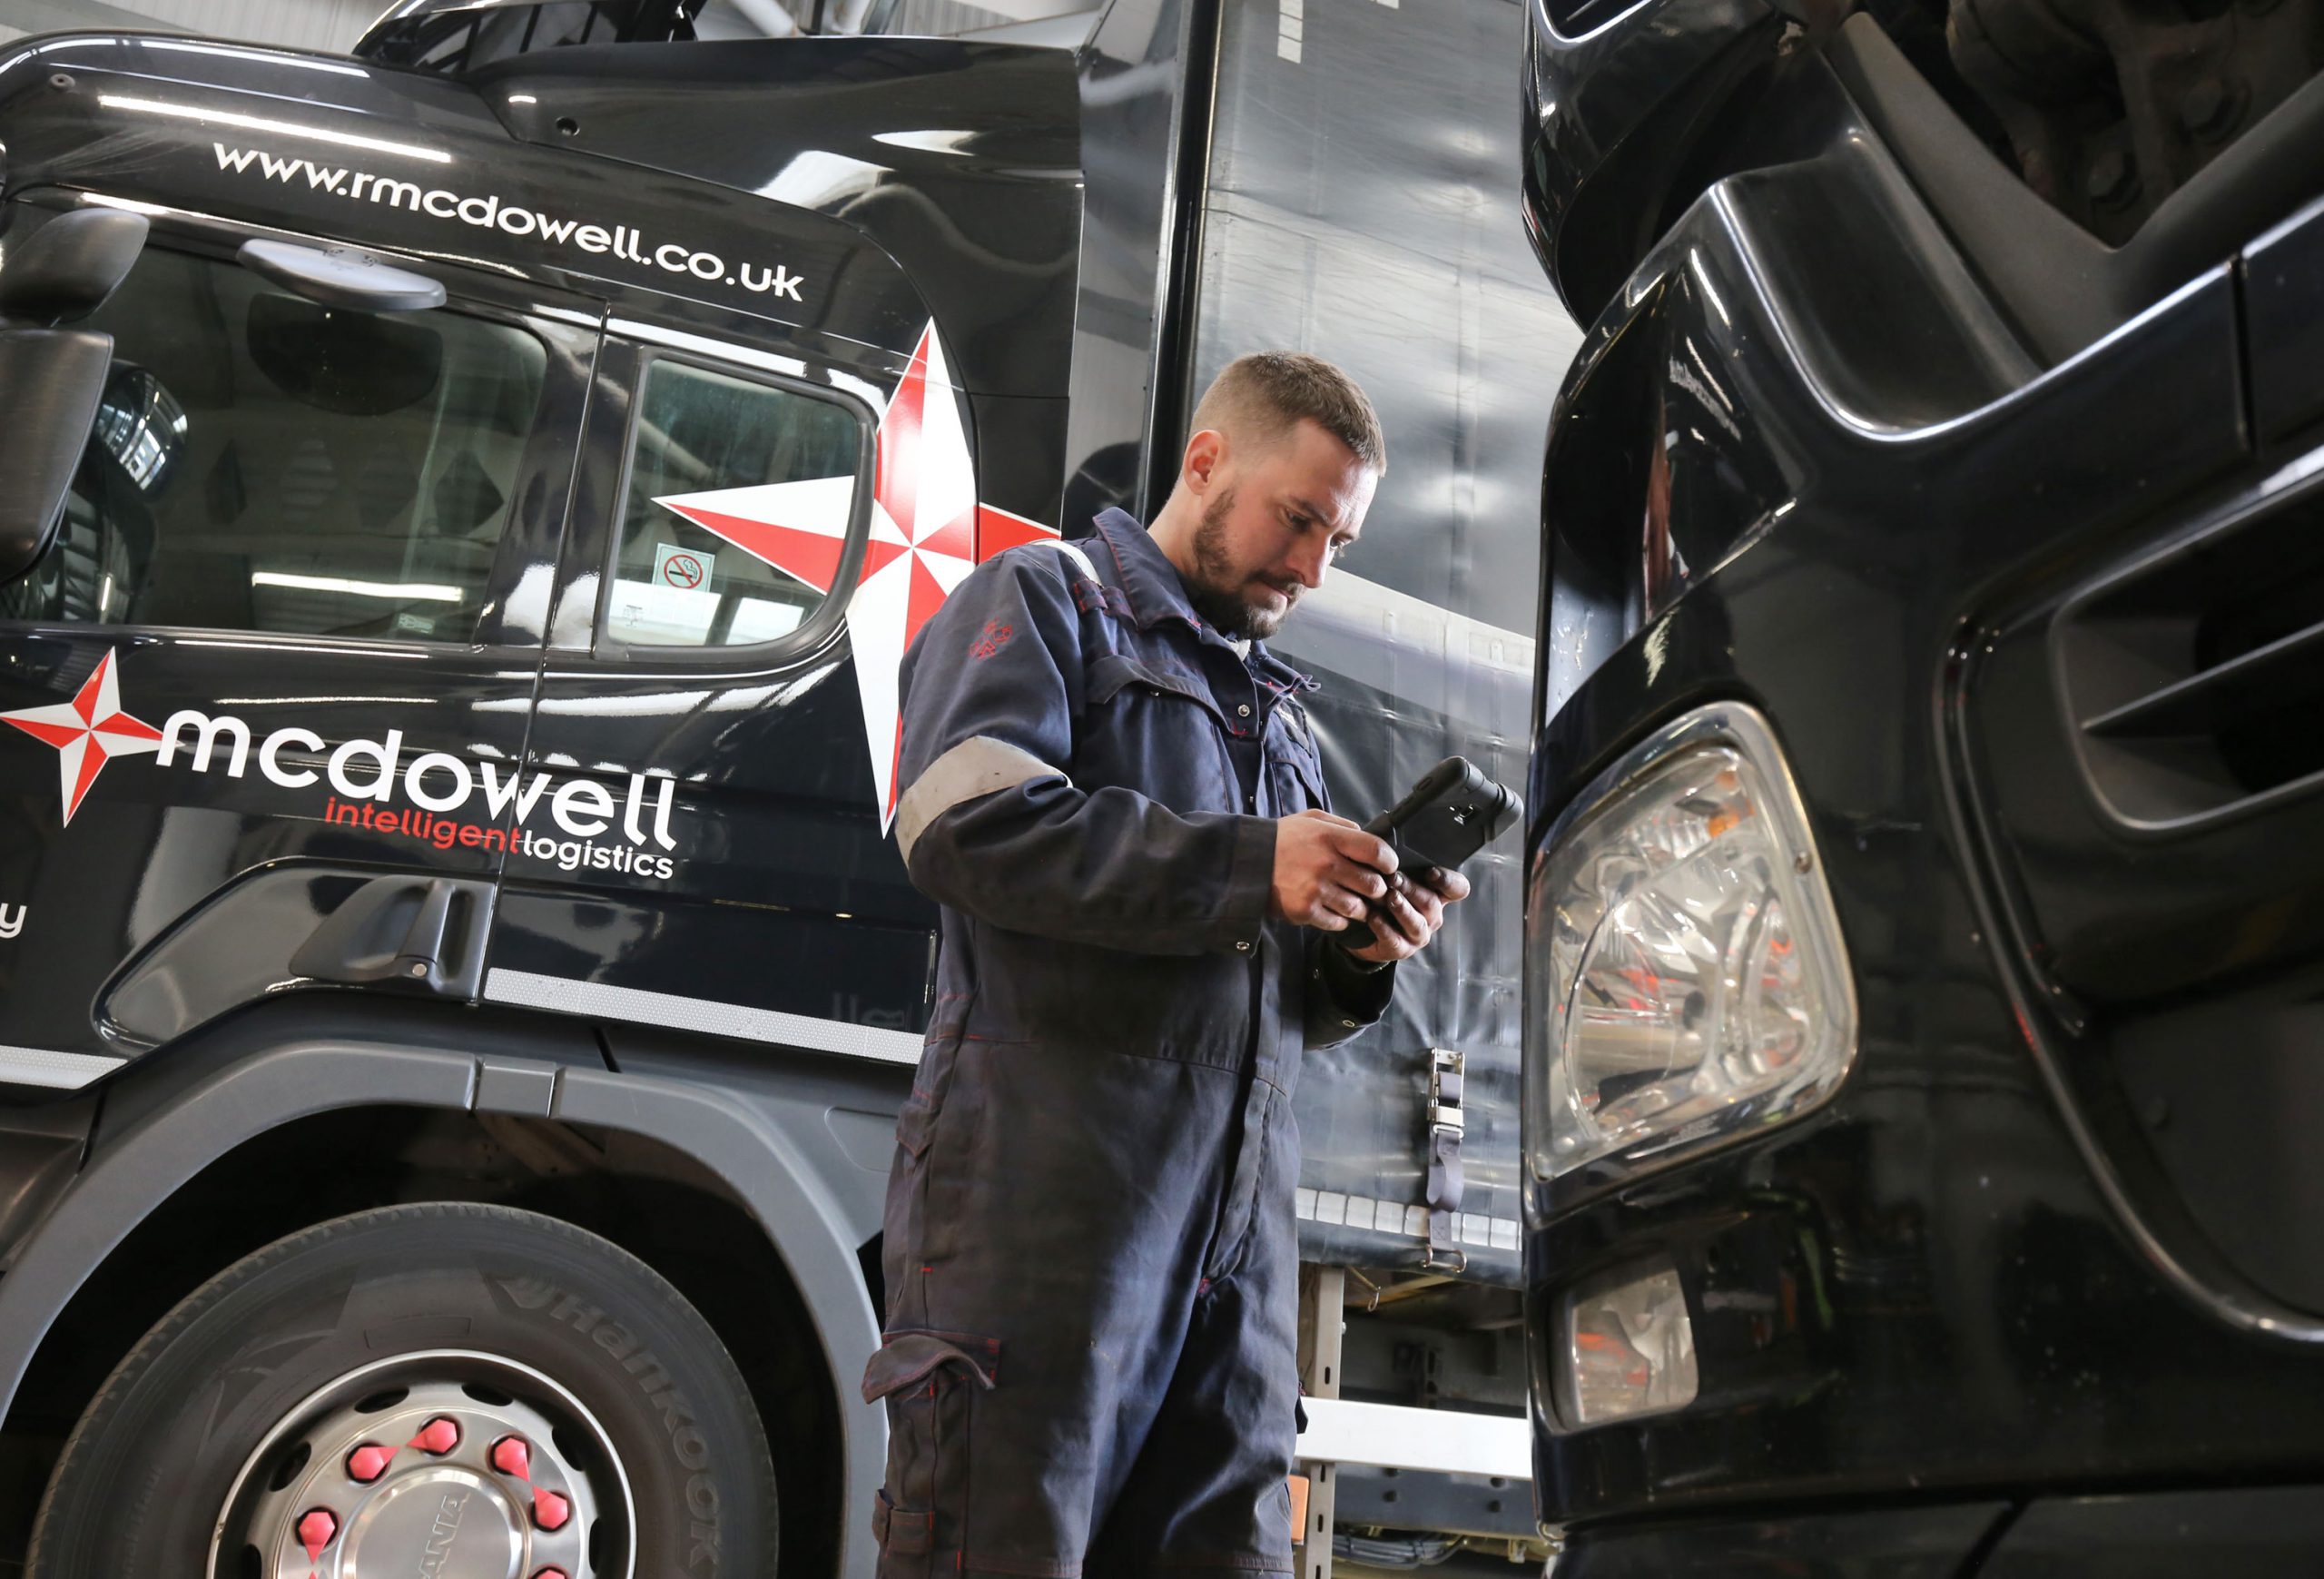 McDowell Haulage Takes the Fast Lane with Freeway Mobile IT